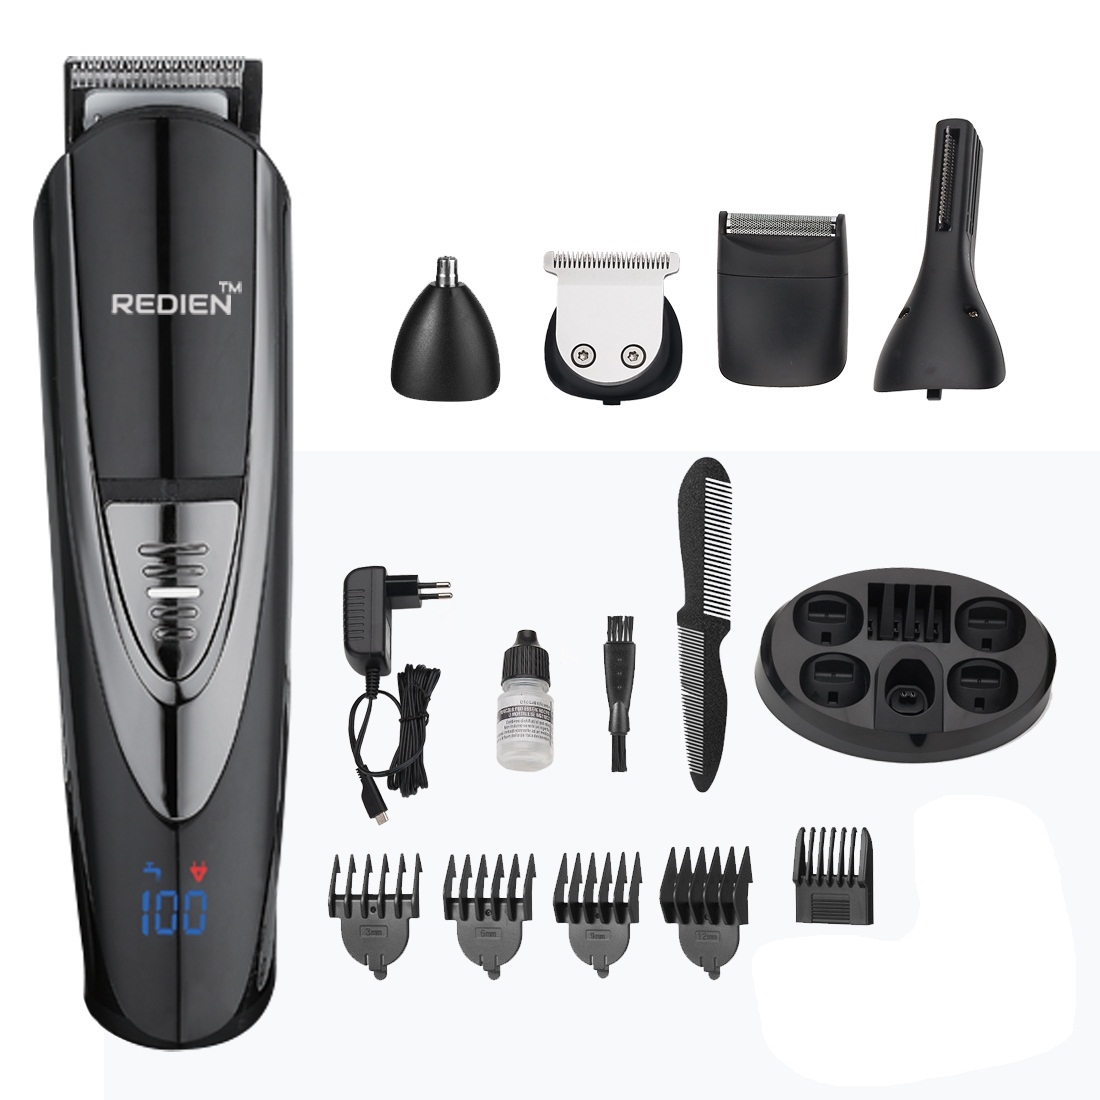 Redien 13in1 men’s grooming kit with water proof and led display RN-8197 (NNZ)